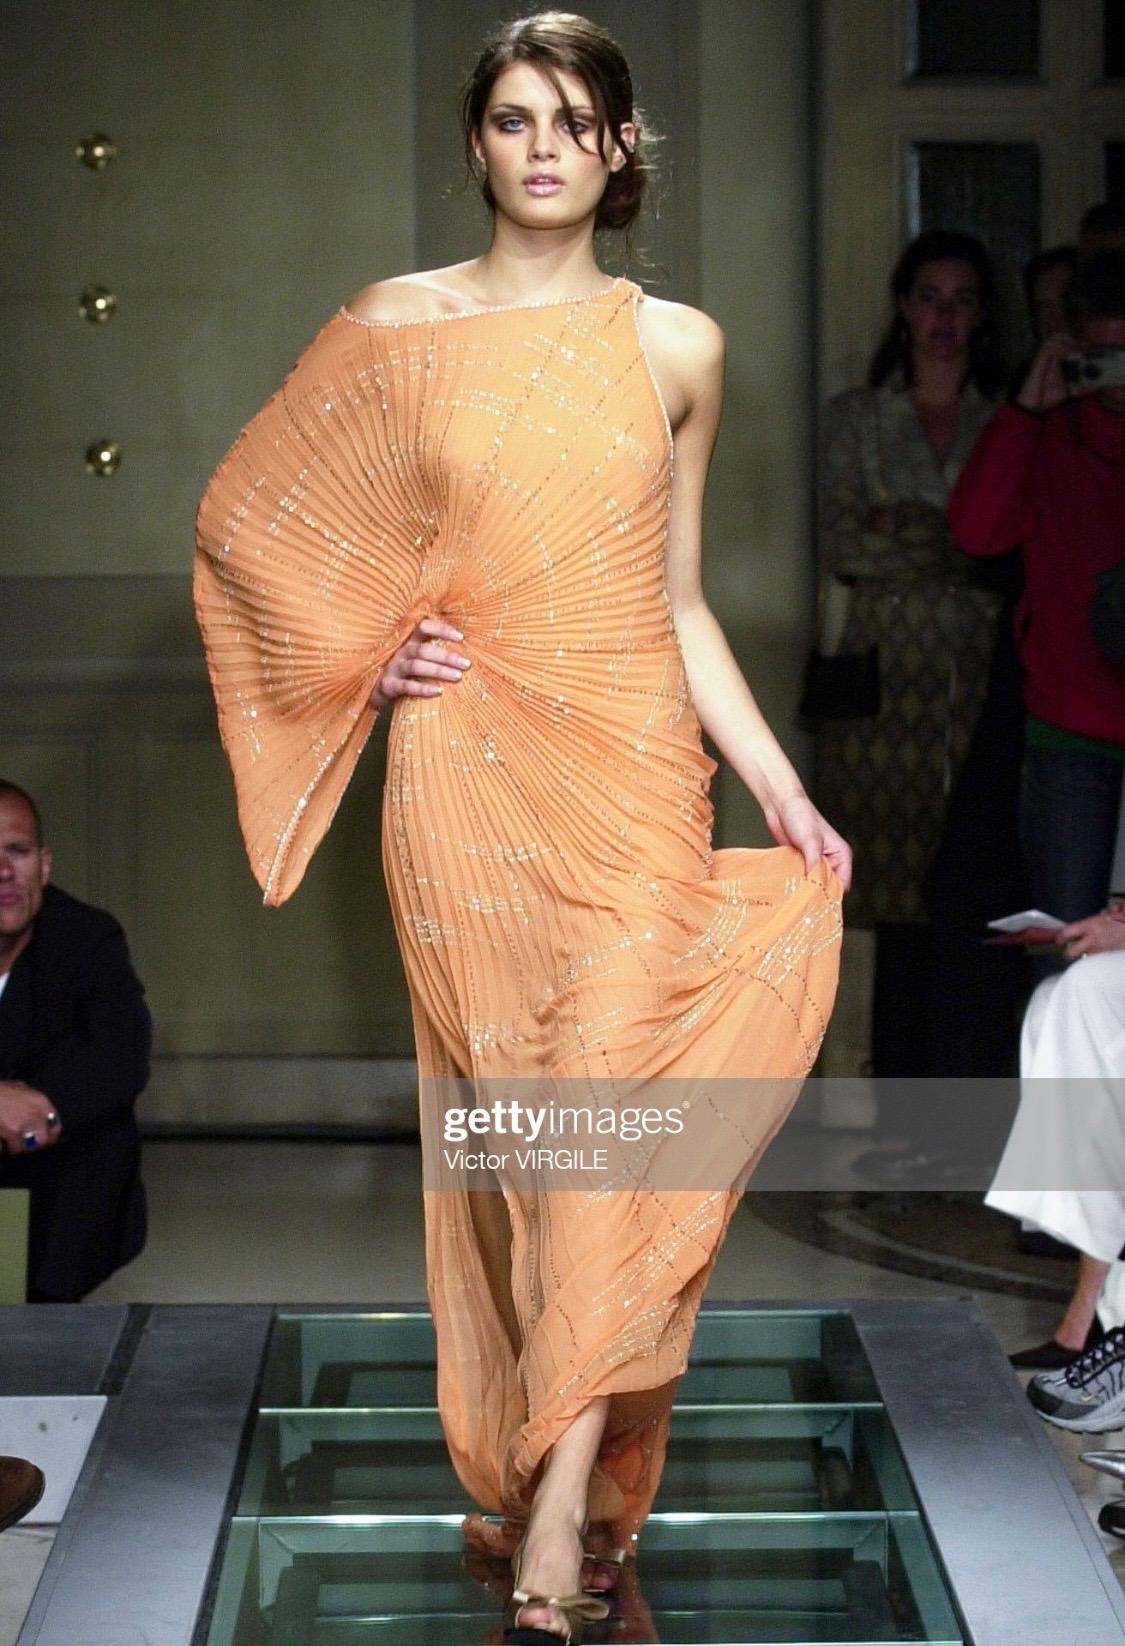 Presenting a Gianni Versace gown made for a modern Roman/Grecian goddess, designed by Donatella Versace for the Fall/Winter 2000 collection. This gown is constructed of a pleated silk which meets at the hip. This dress features free flowing fabric